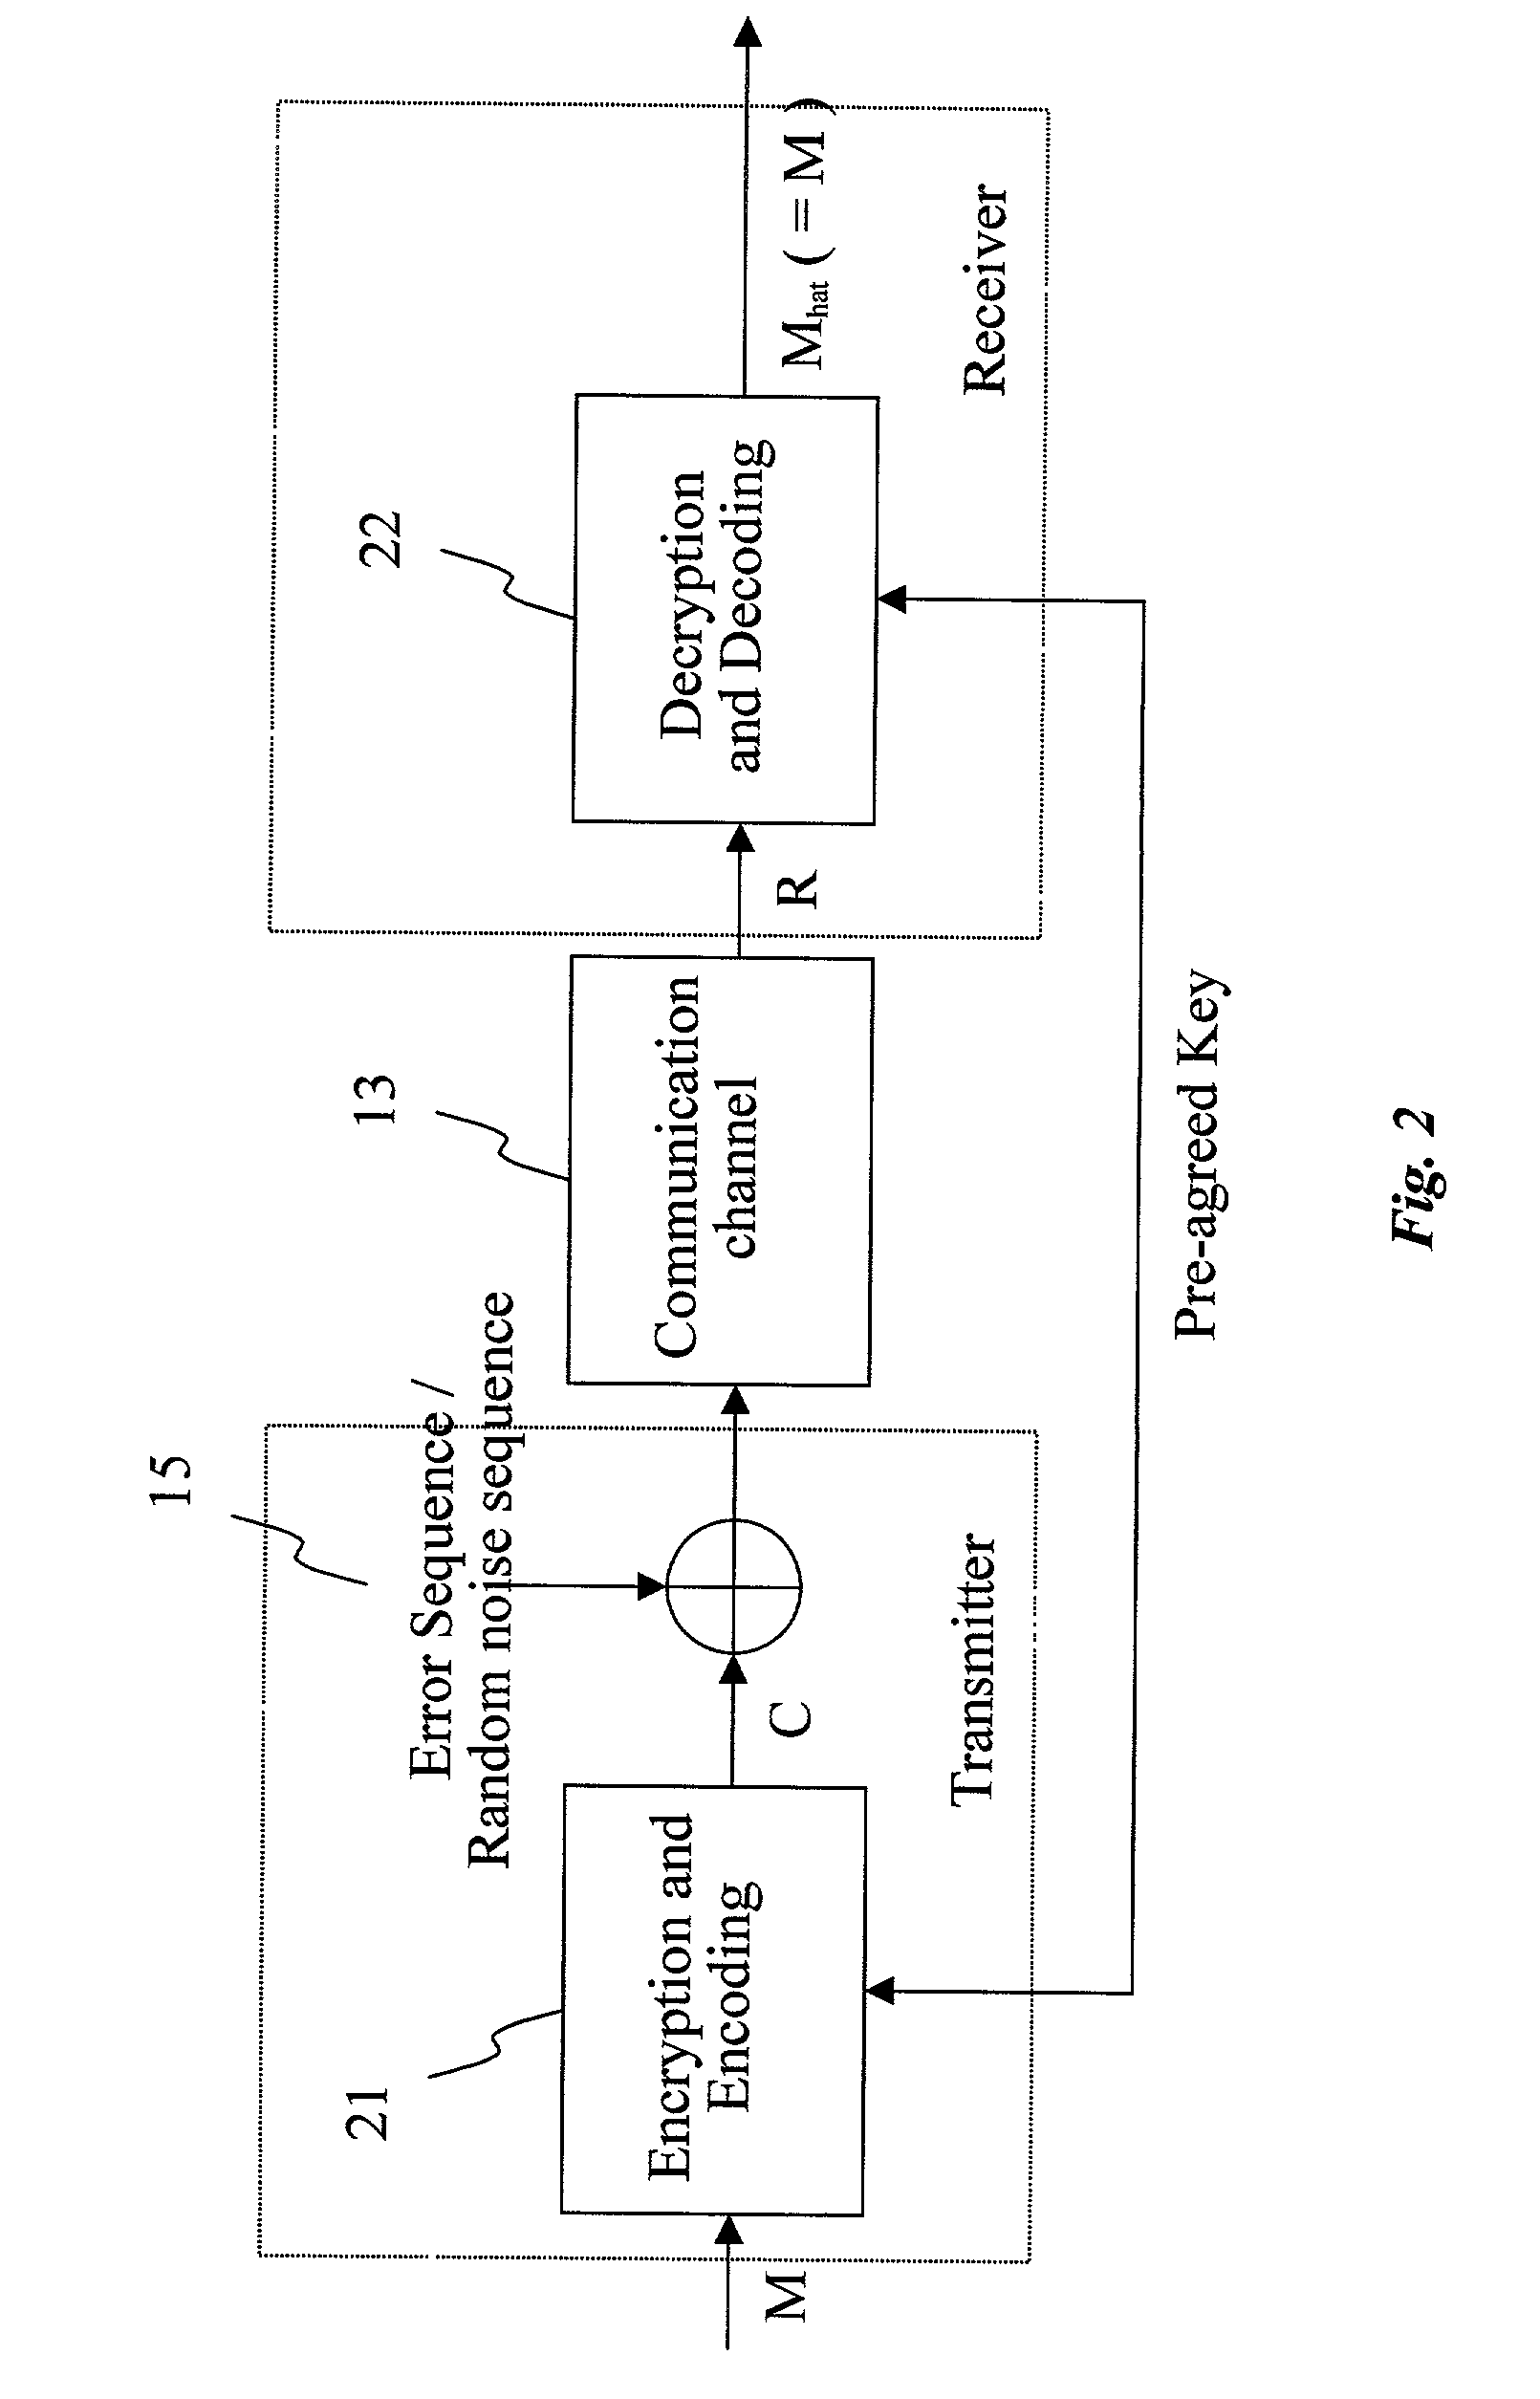 System and method for joint encryption and error-correcting coding